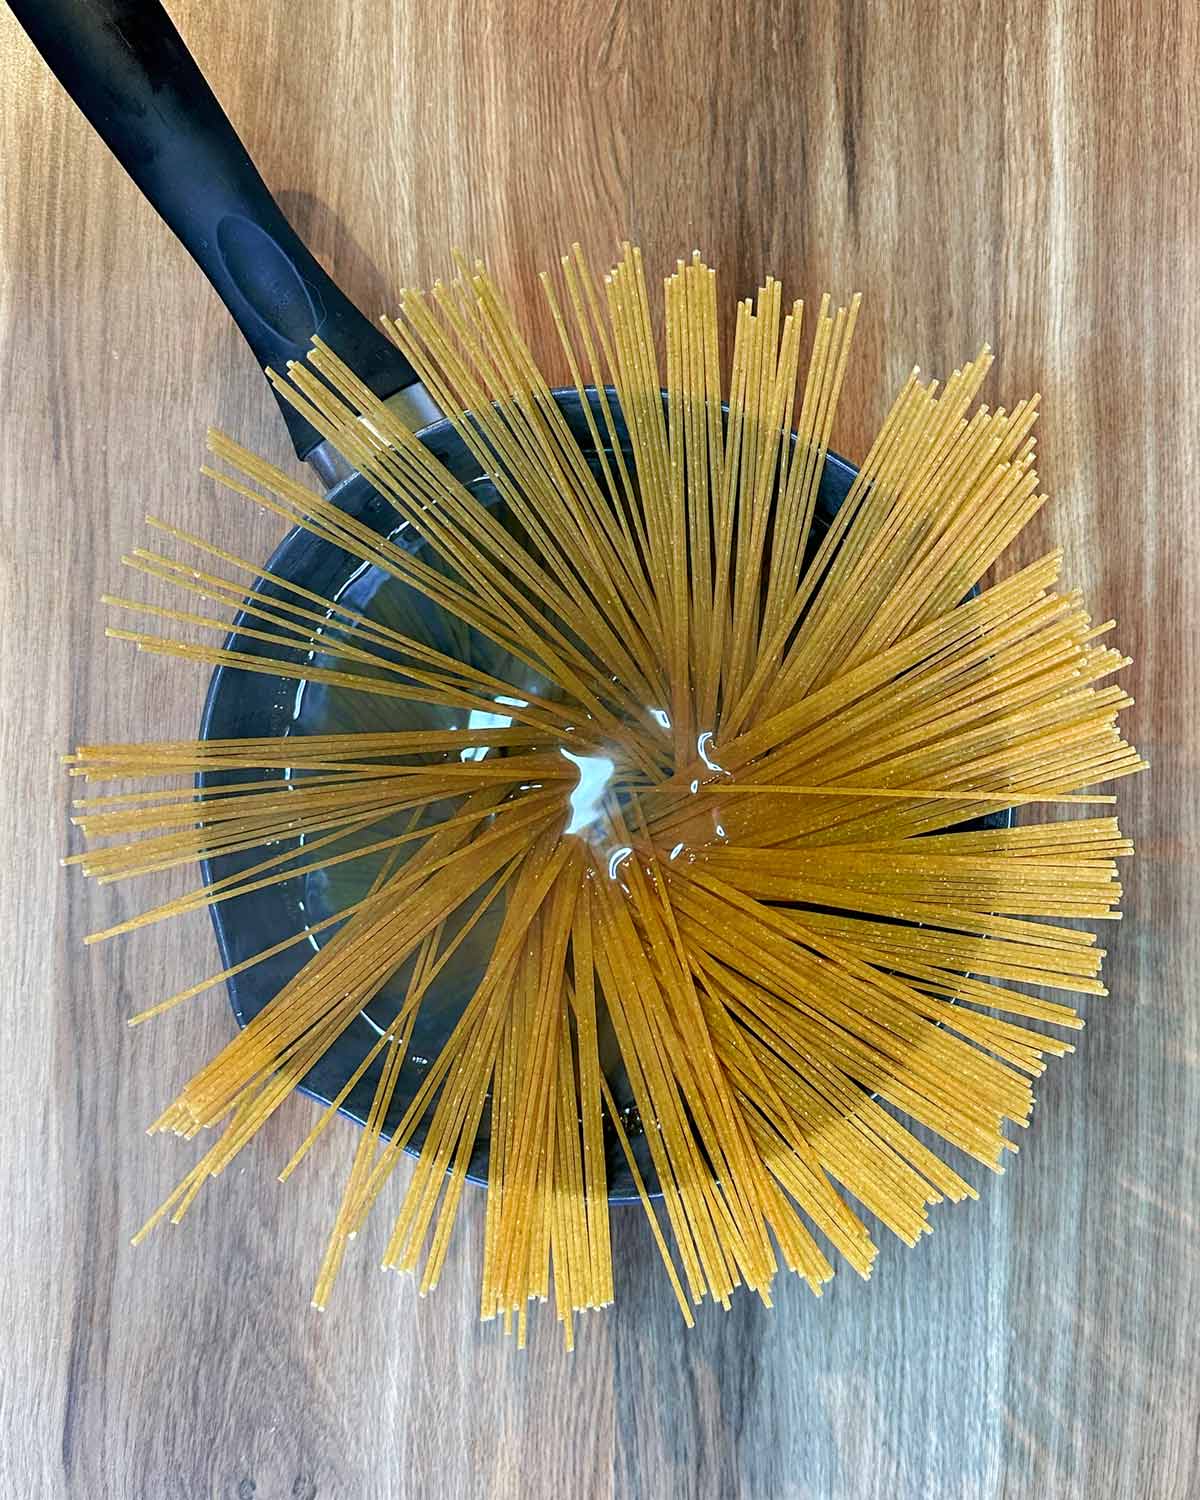 A pan full of uncooked spaghetti.